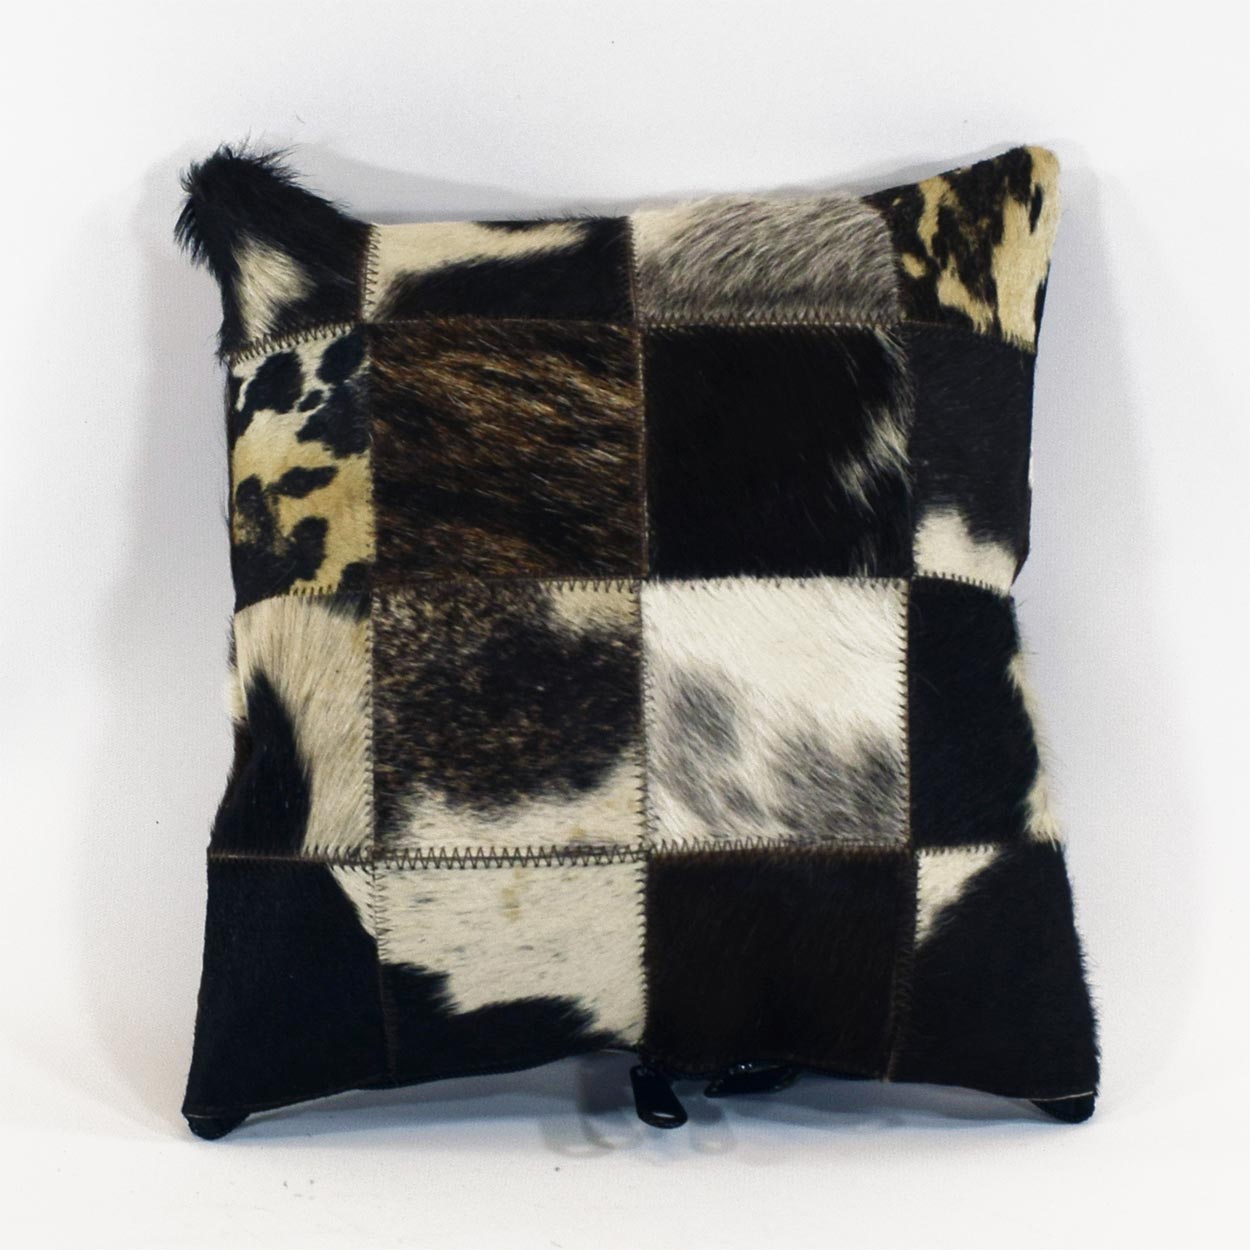 322026-1 - 12in x 12in Cowhide Pillow - Patchwork - Tri-color Spotted